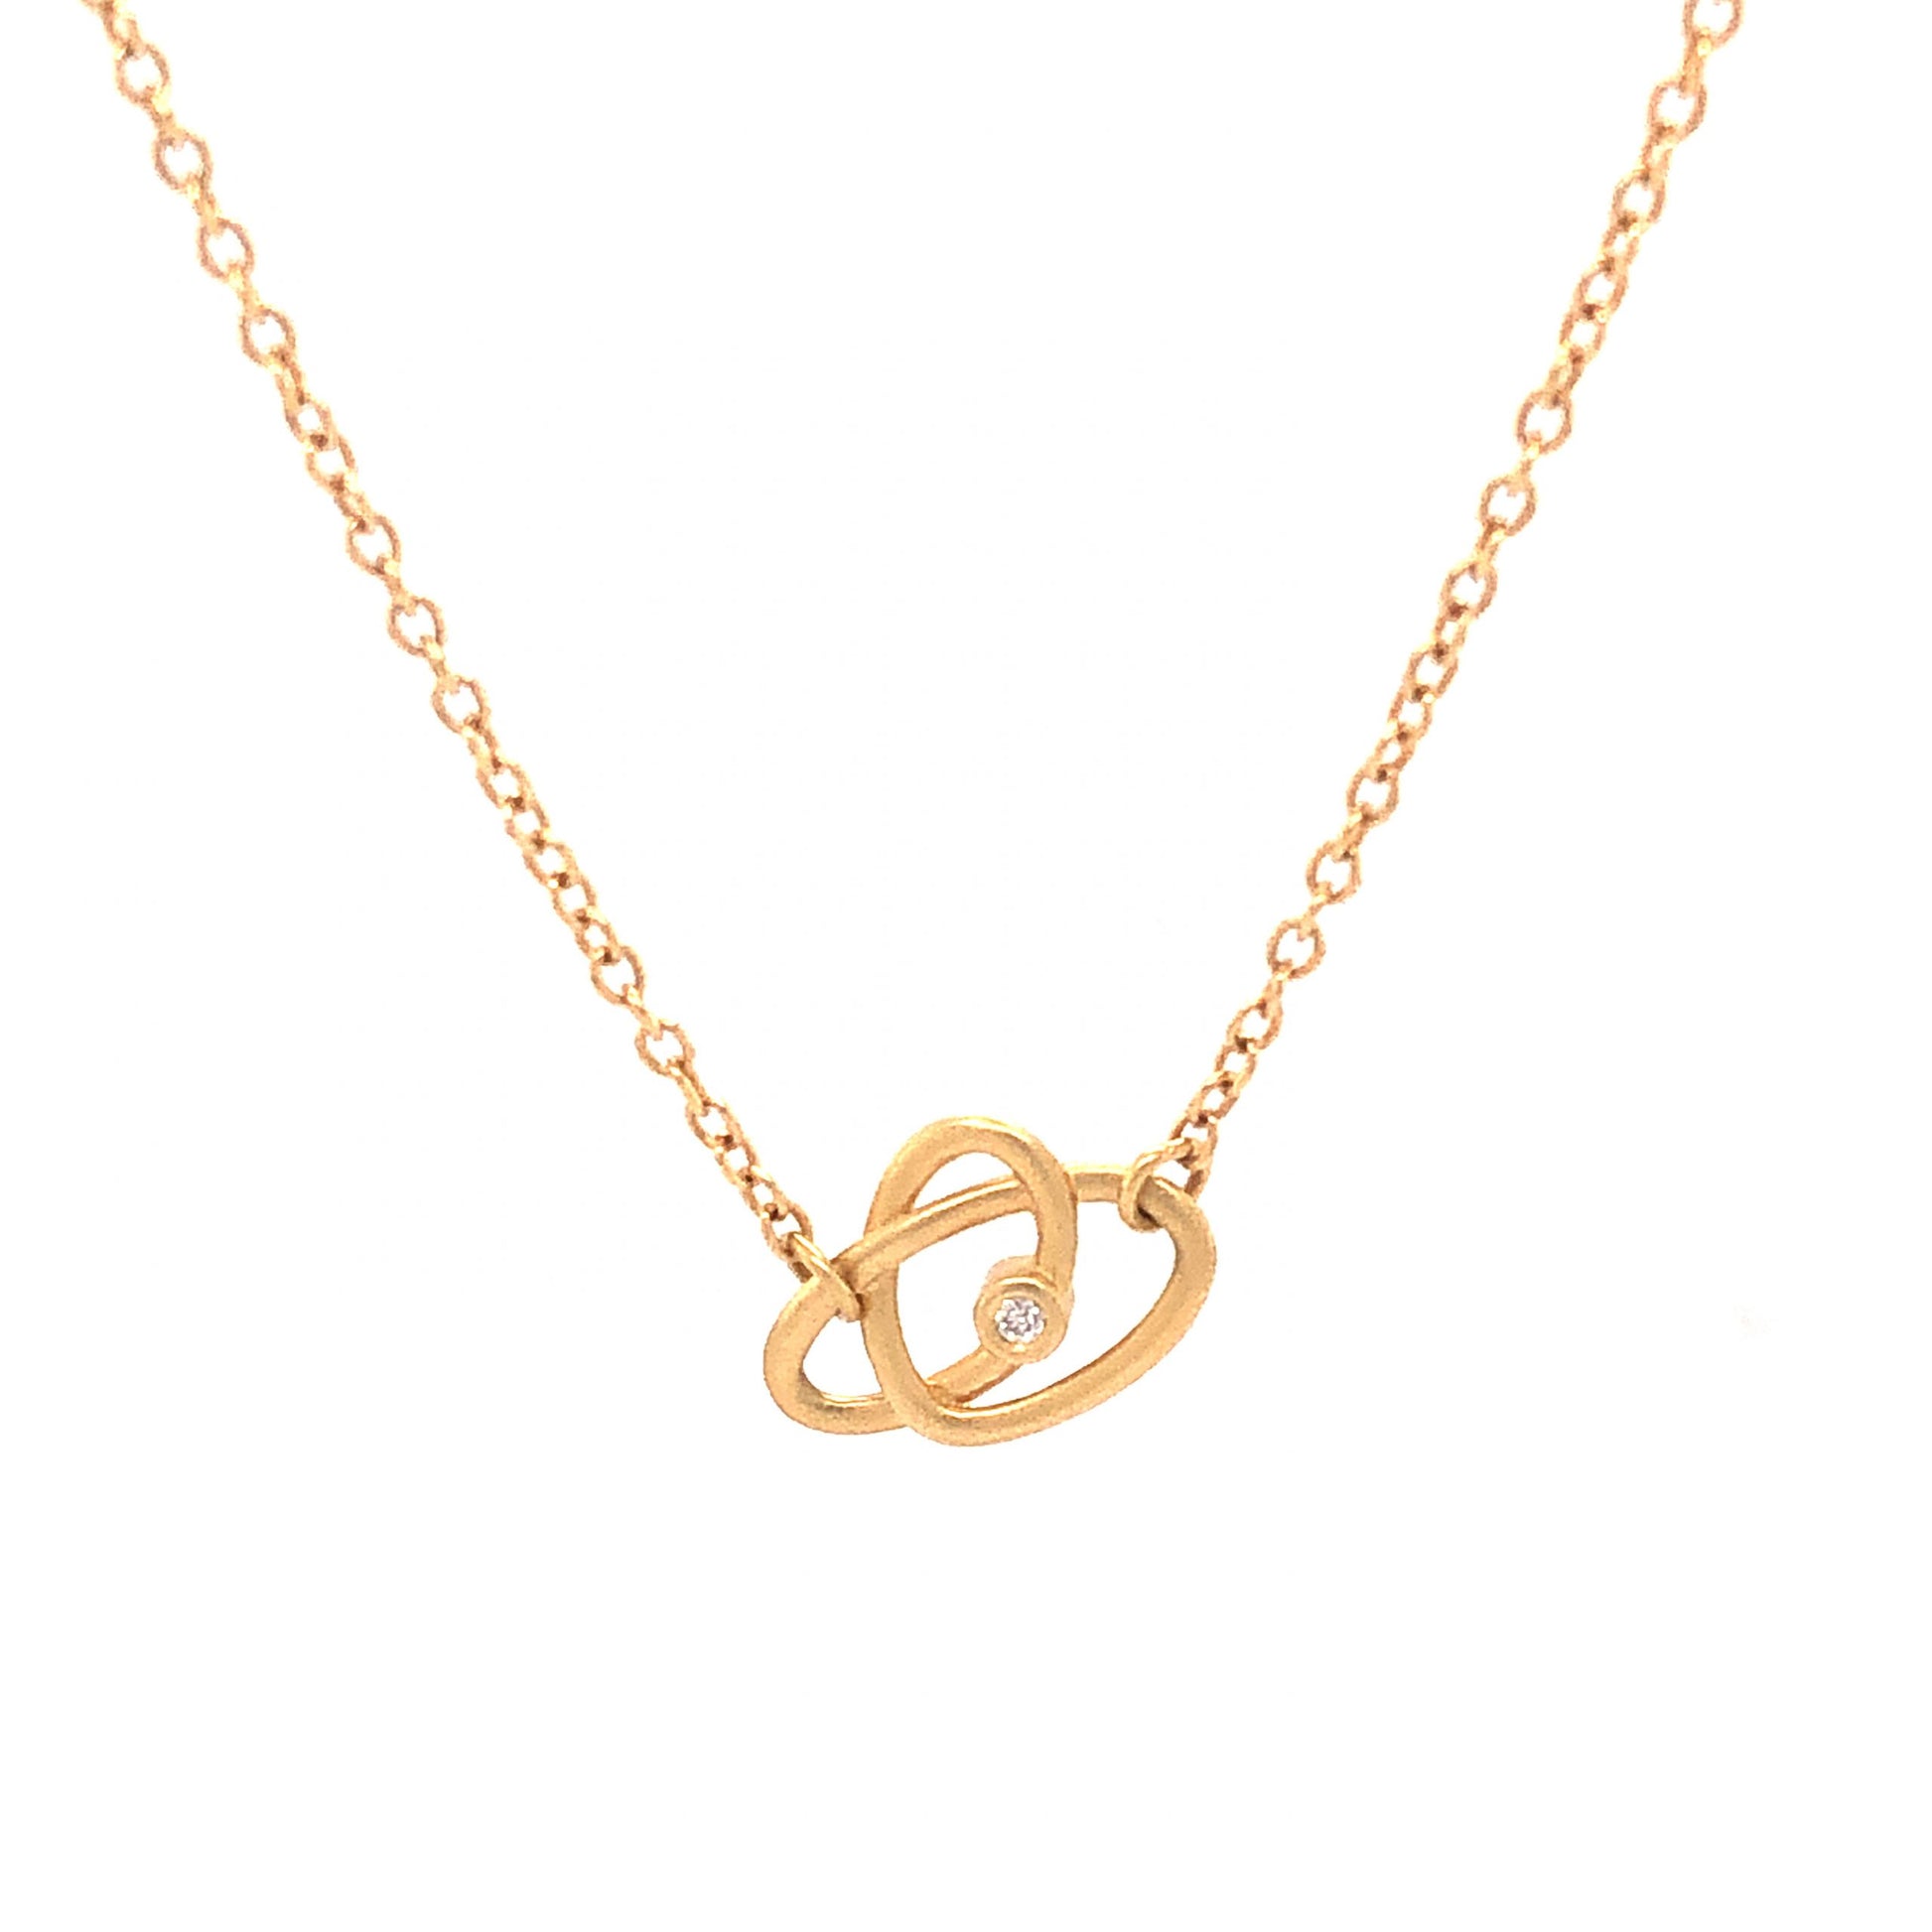 Diamond Knot Station Necklace in 18k Yellow GoldComposition: 14 Karat Yellow Gold Total Diamond Weight: .10ct Total Gram Weight: 6.5 g Inscription: 18k
      